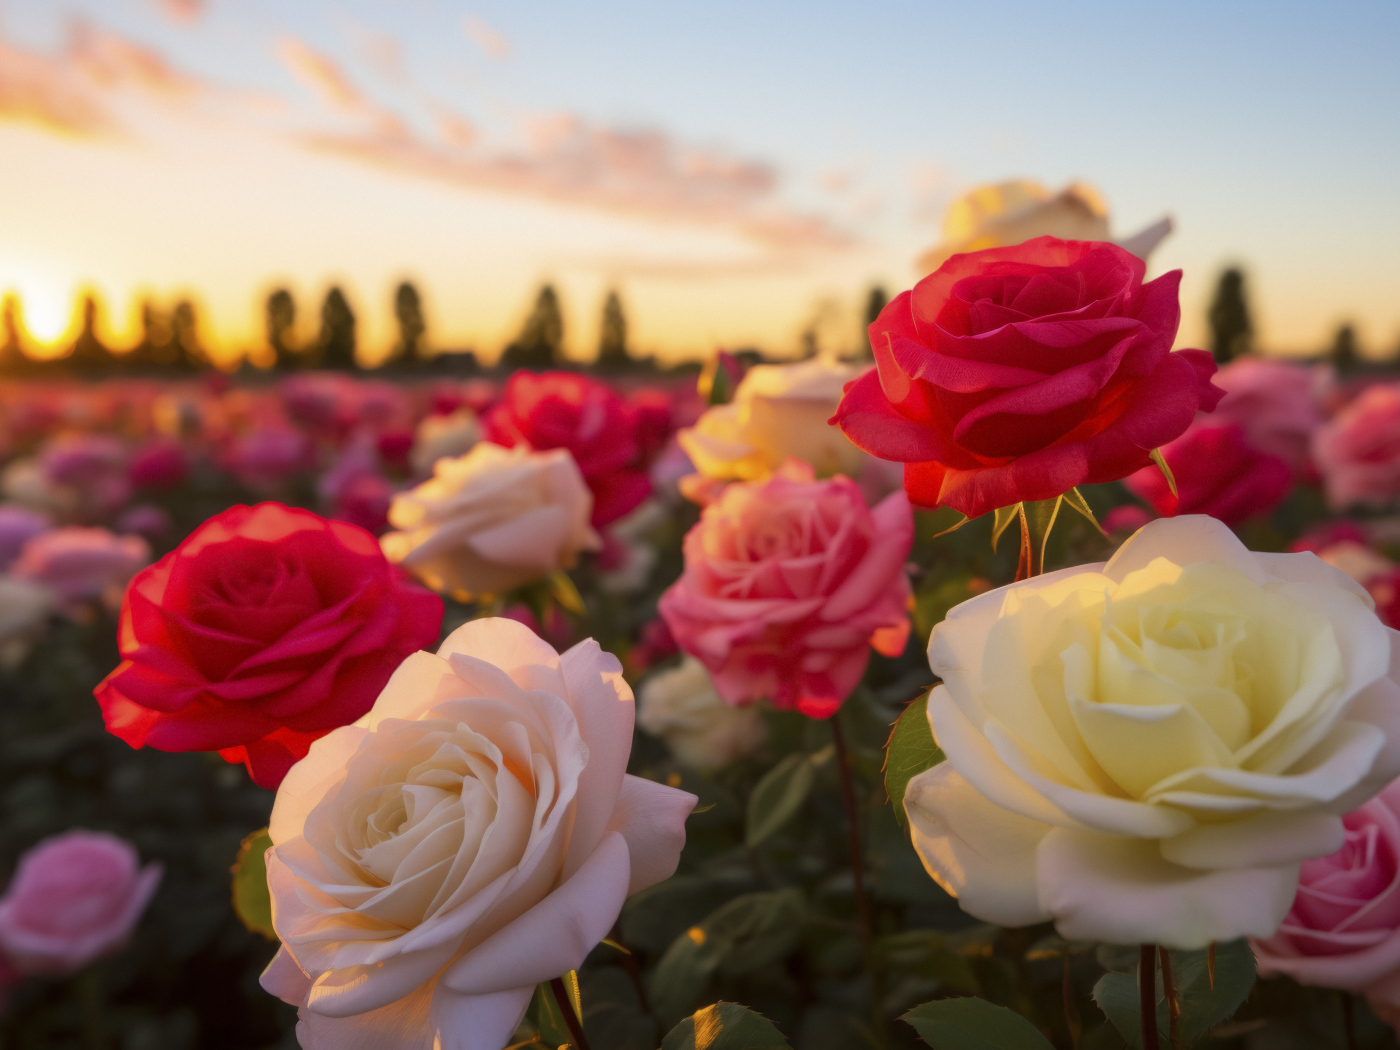 Delicate multi-colored roses in the rays of the sun at sunset